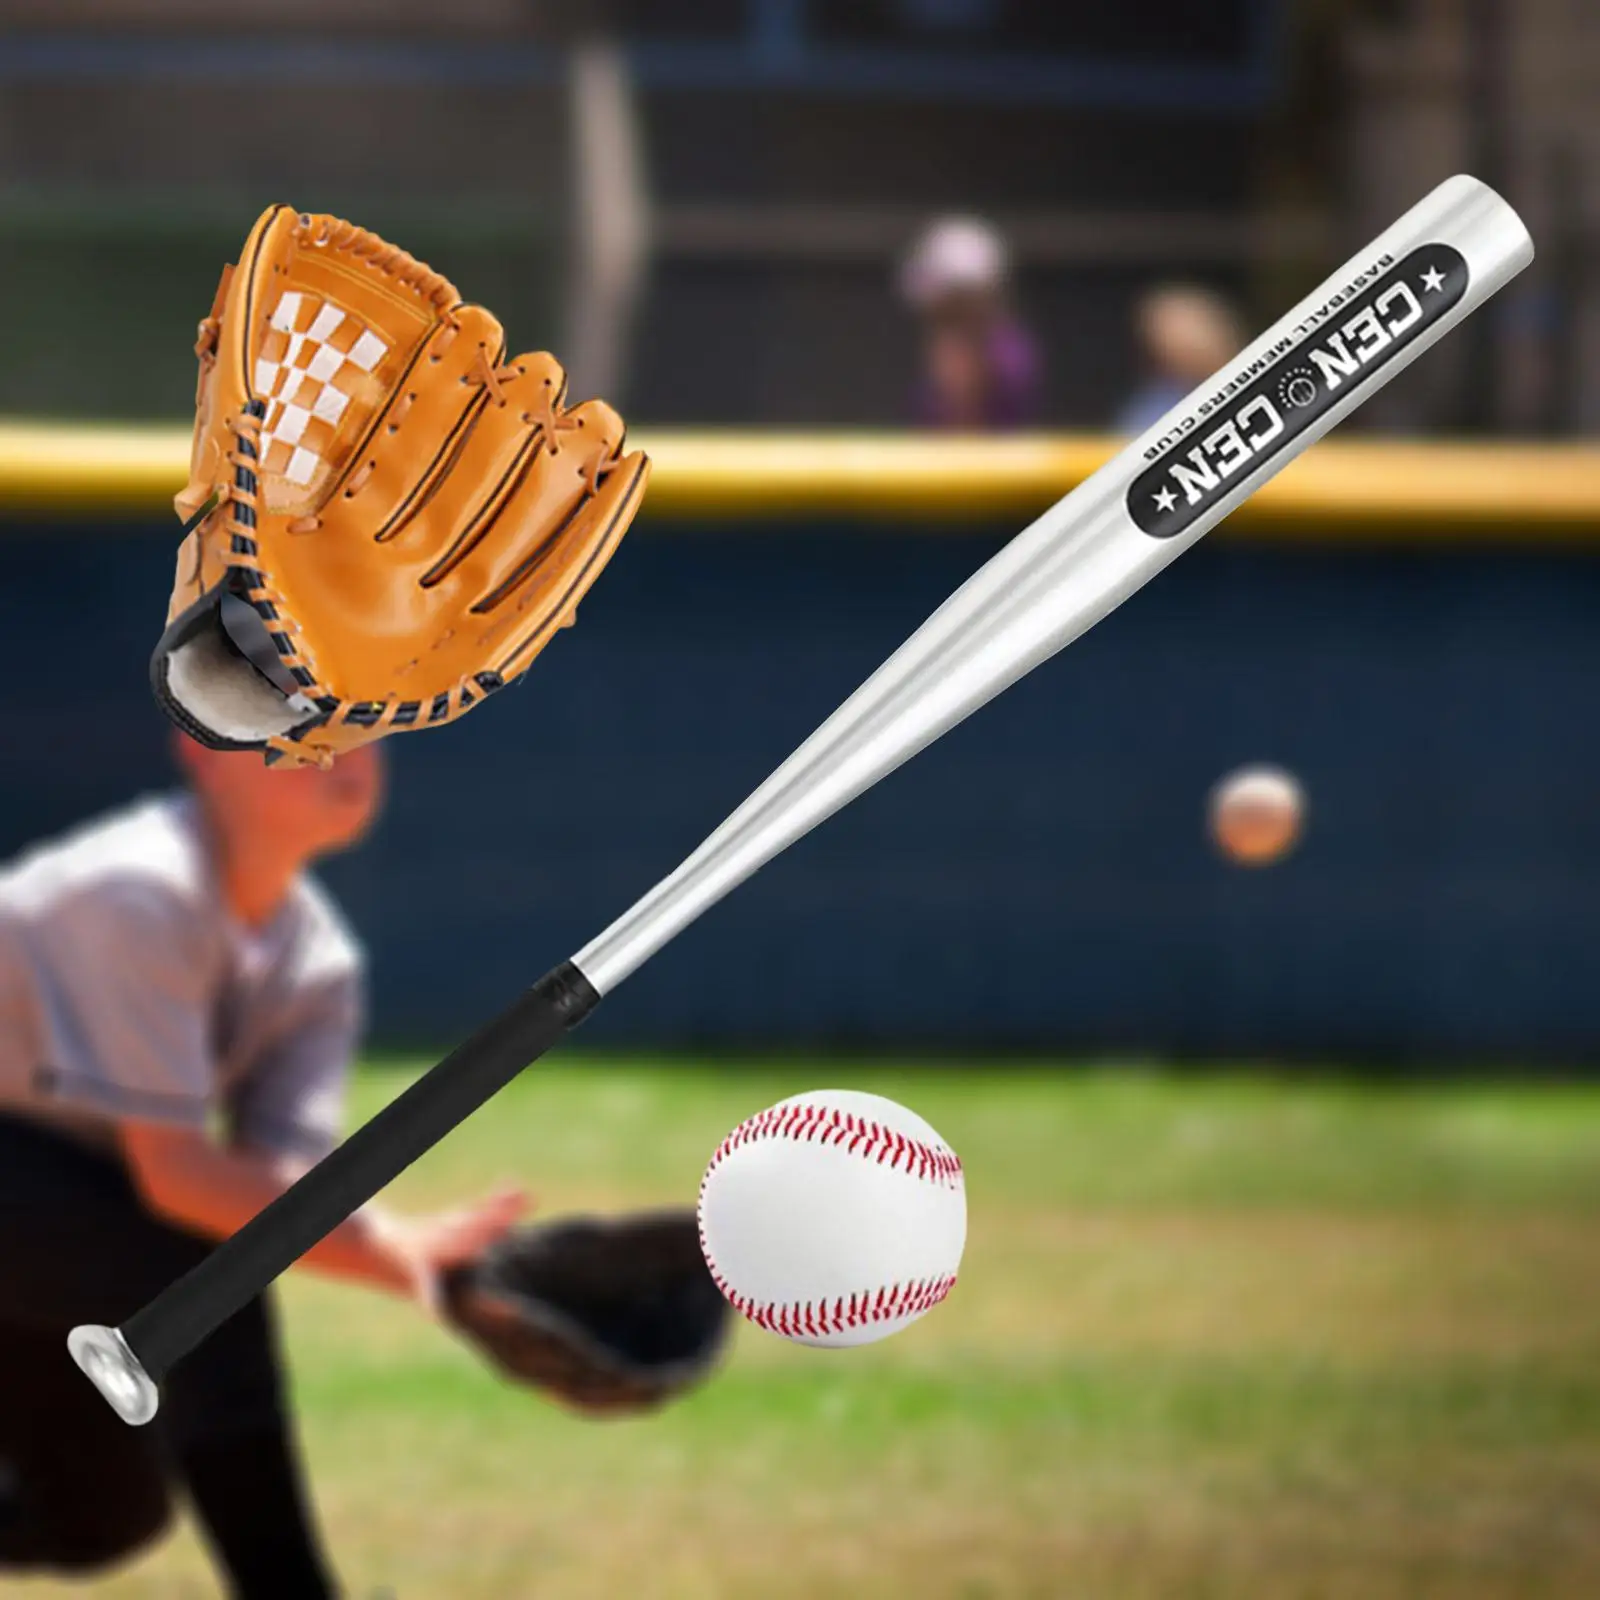 Baseball Bat Set with Baseball Glove and Ball Traing Pactise Playing Game Trainer Softball for Home Outdoor Kids Teenagers Youth